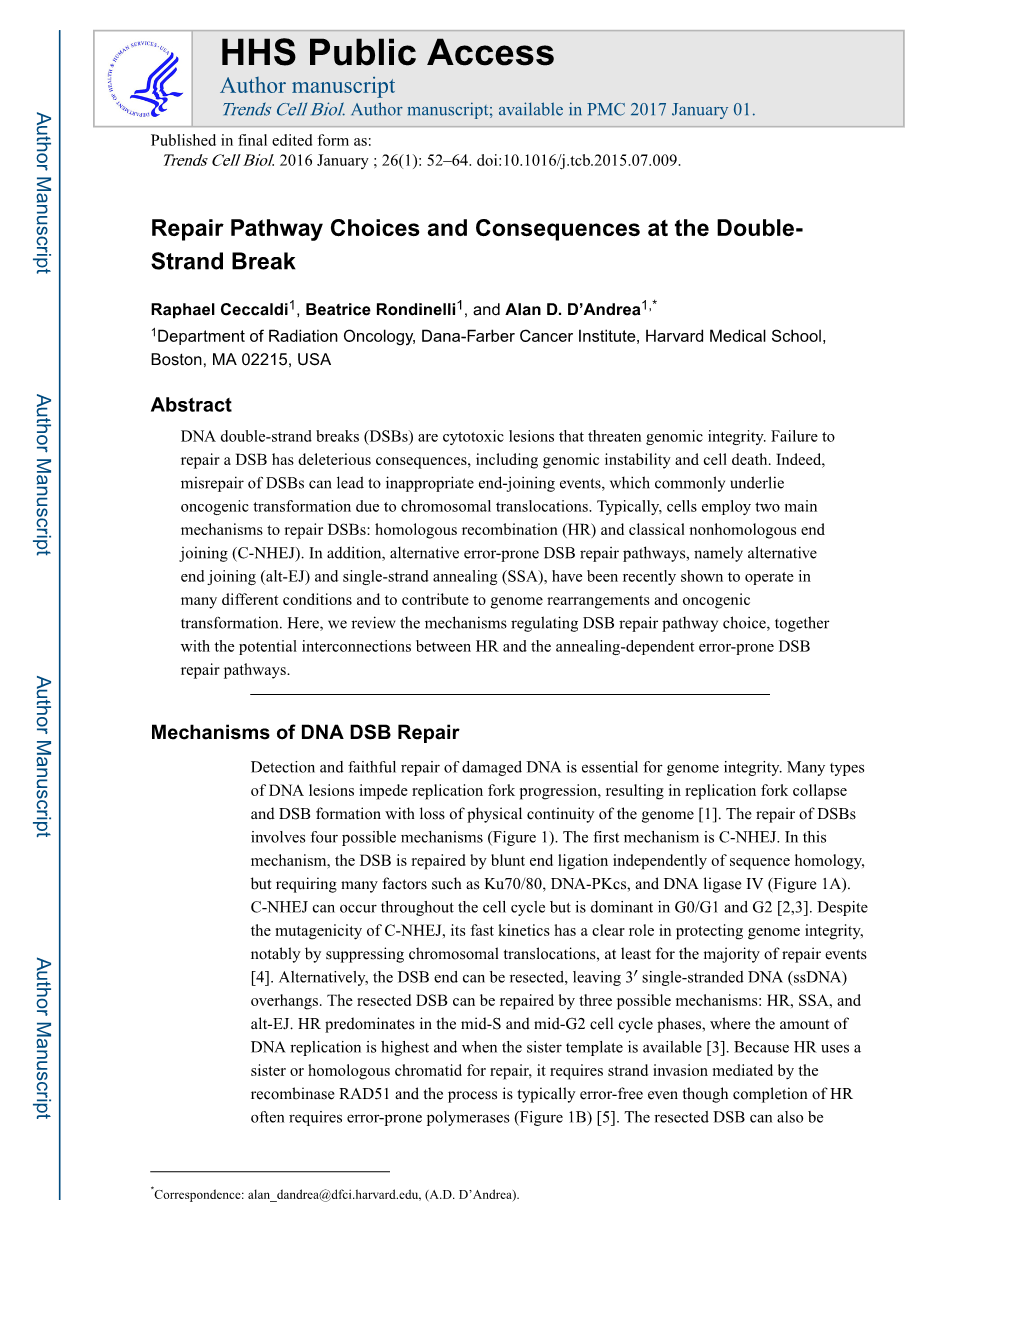 Repair Pathway Choices and Consequences at the Double-Strand Break